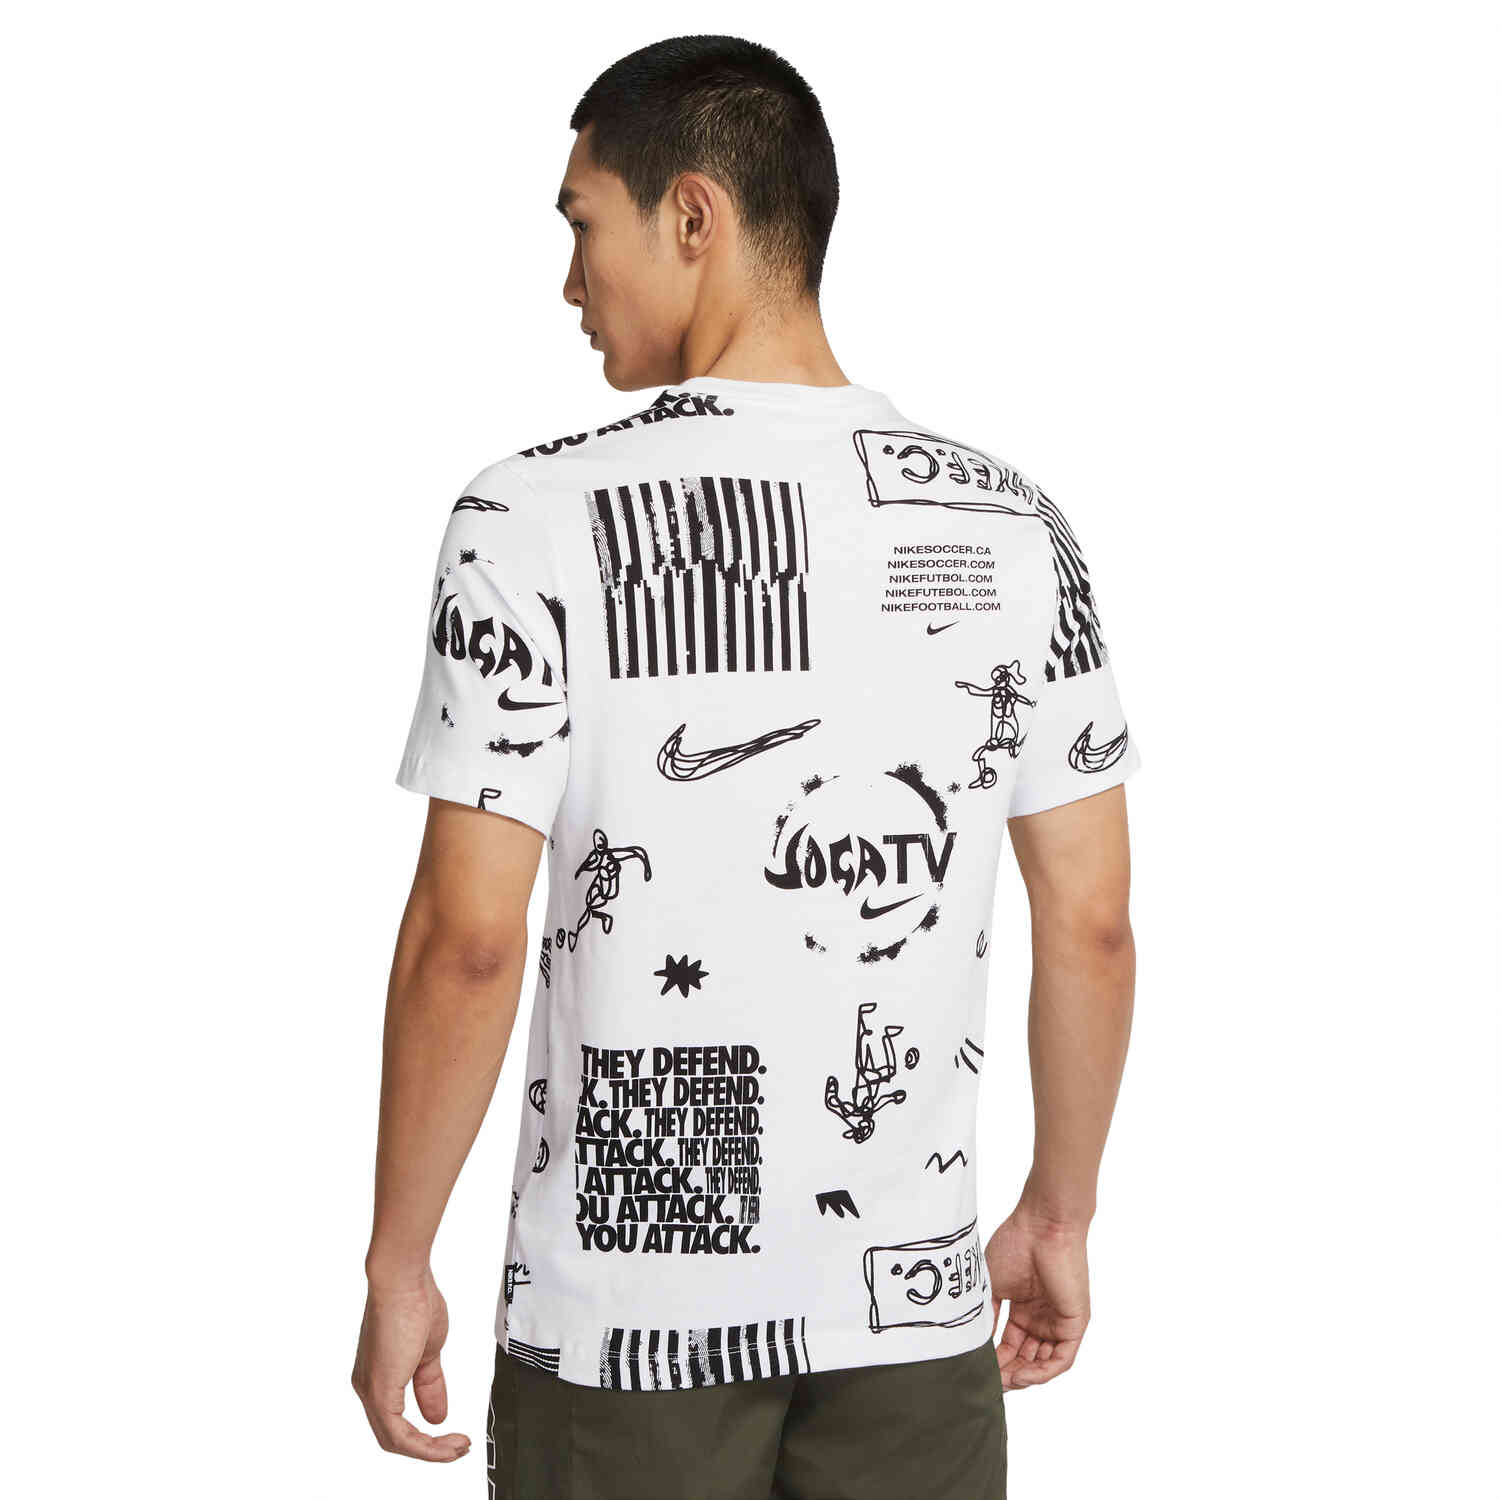 Nike FC Lifestyle All over Print Tee - White - SoccerPro